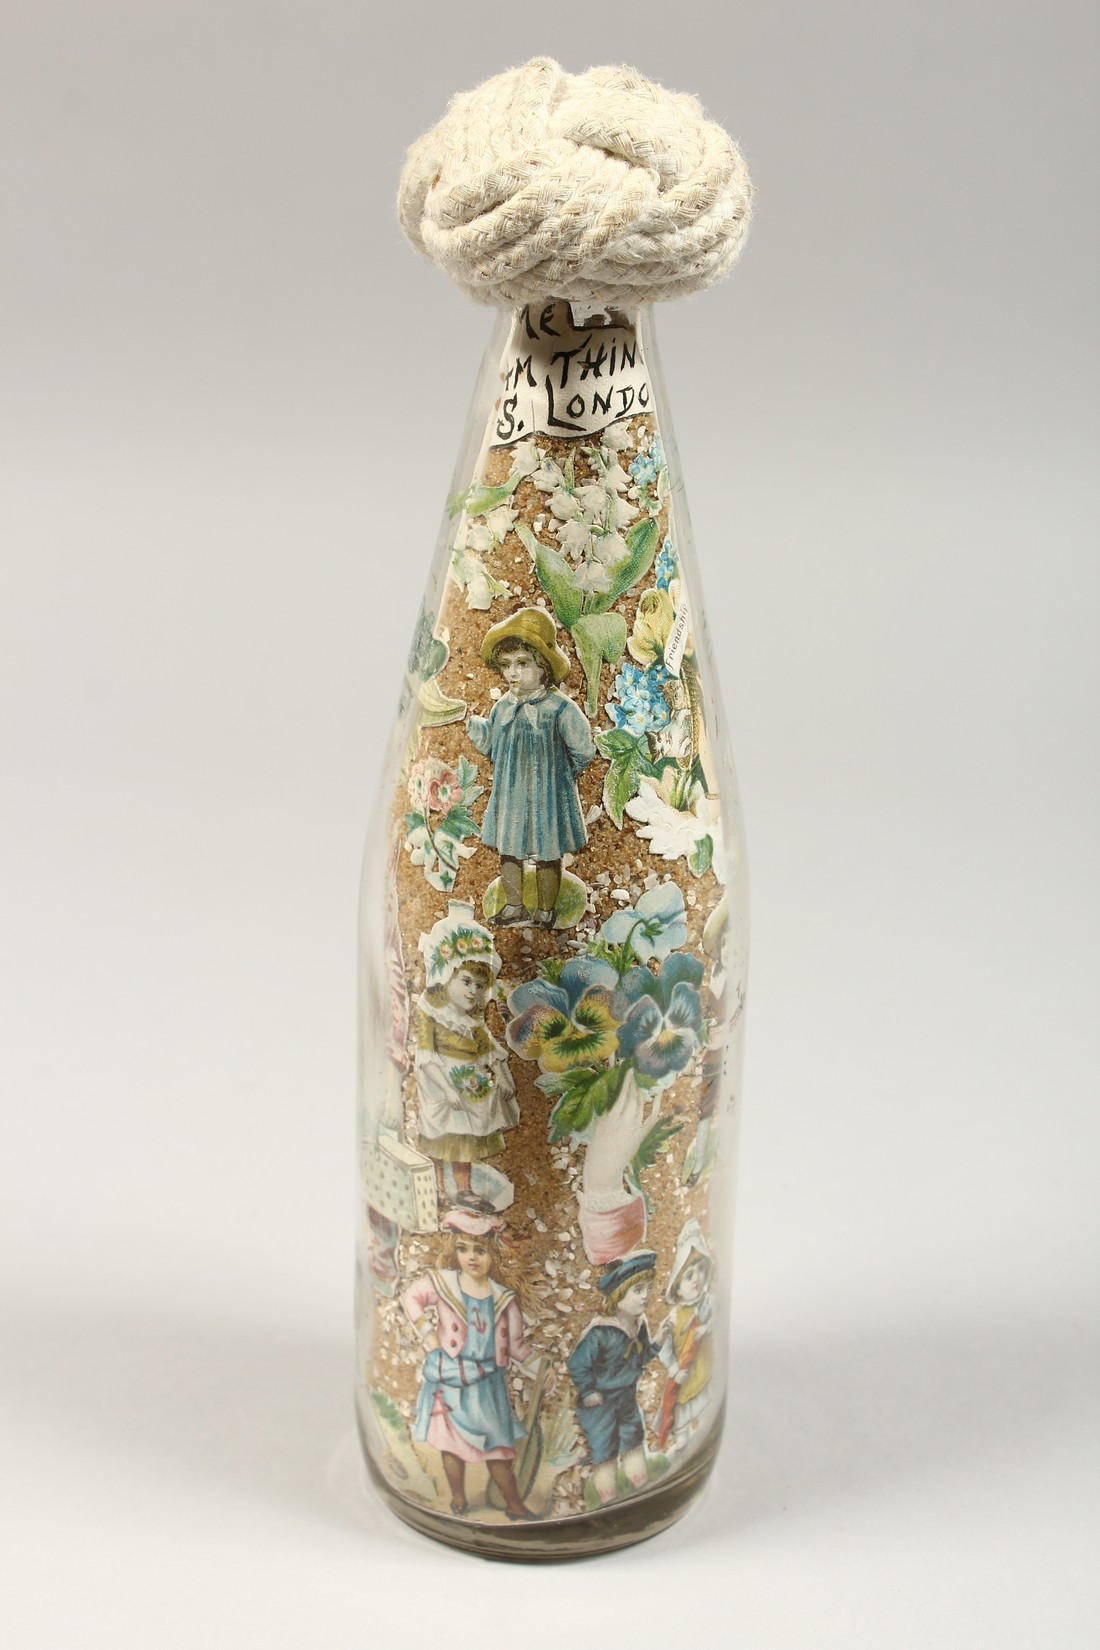 A LOVE TOKEN BOTTLE, DATED 1891. 10.5ins high. - Image 3 of 8